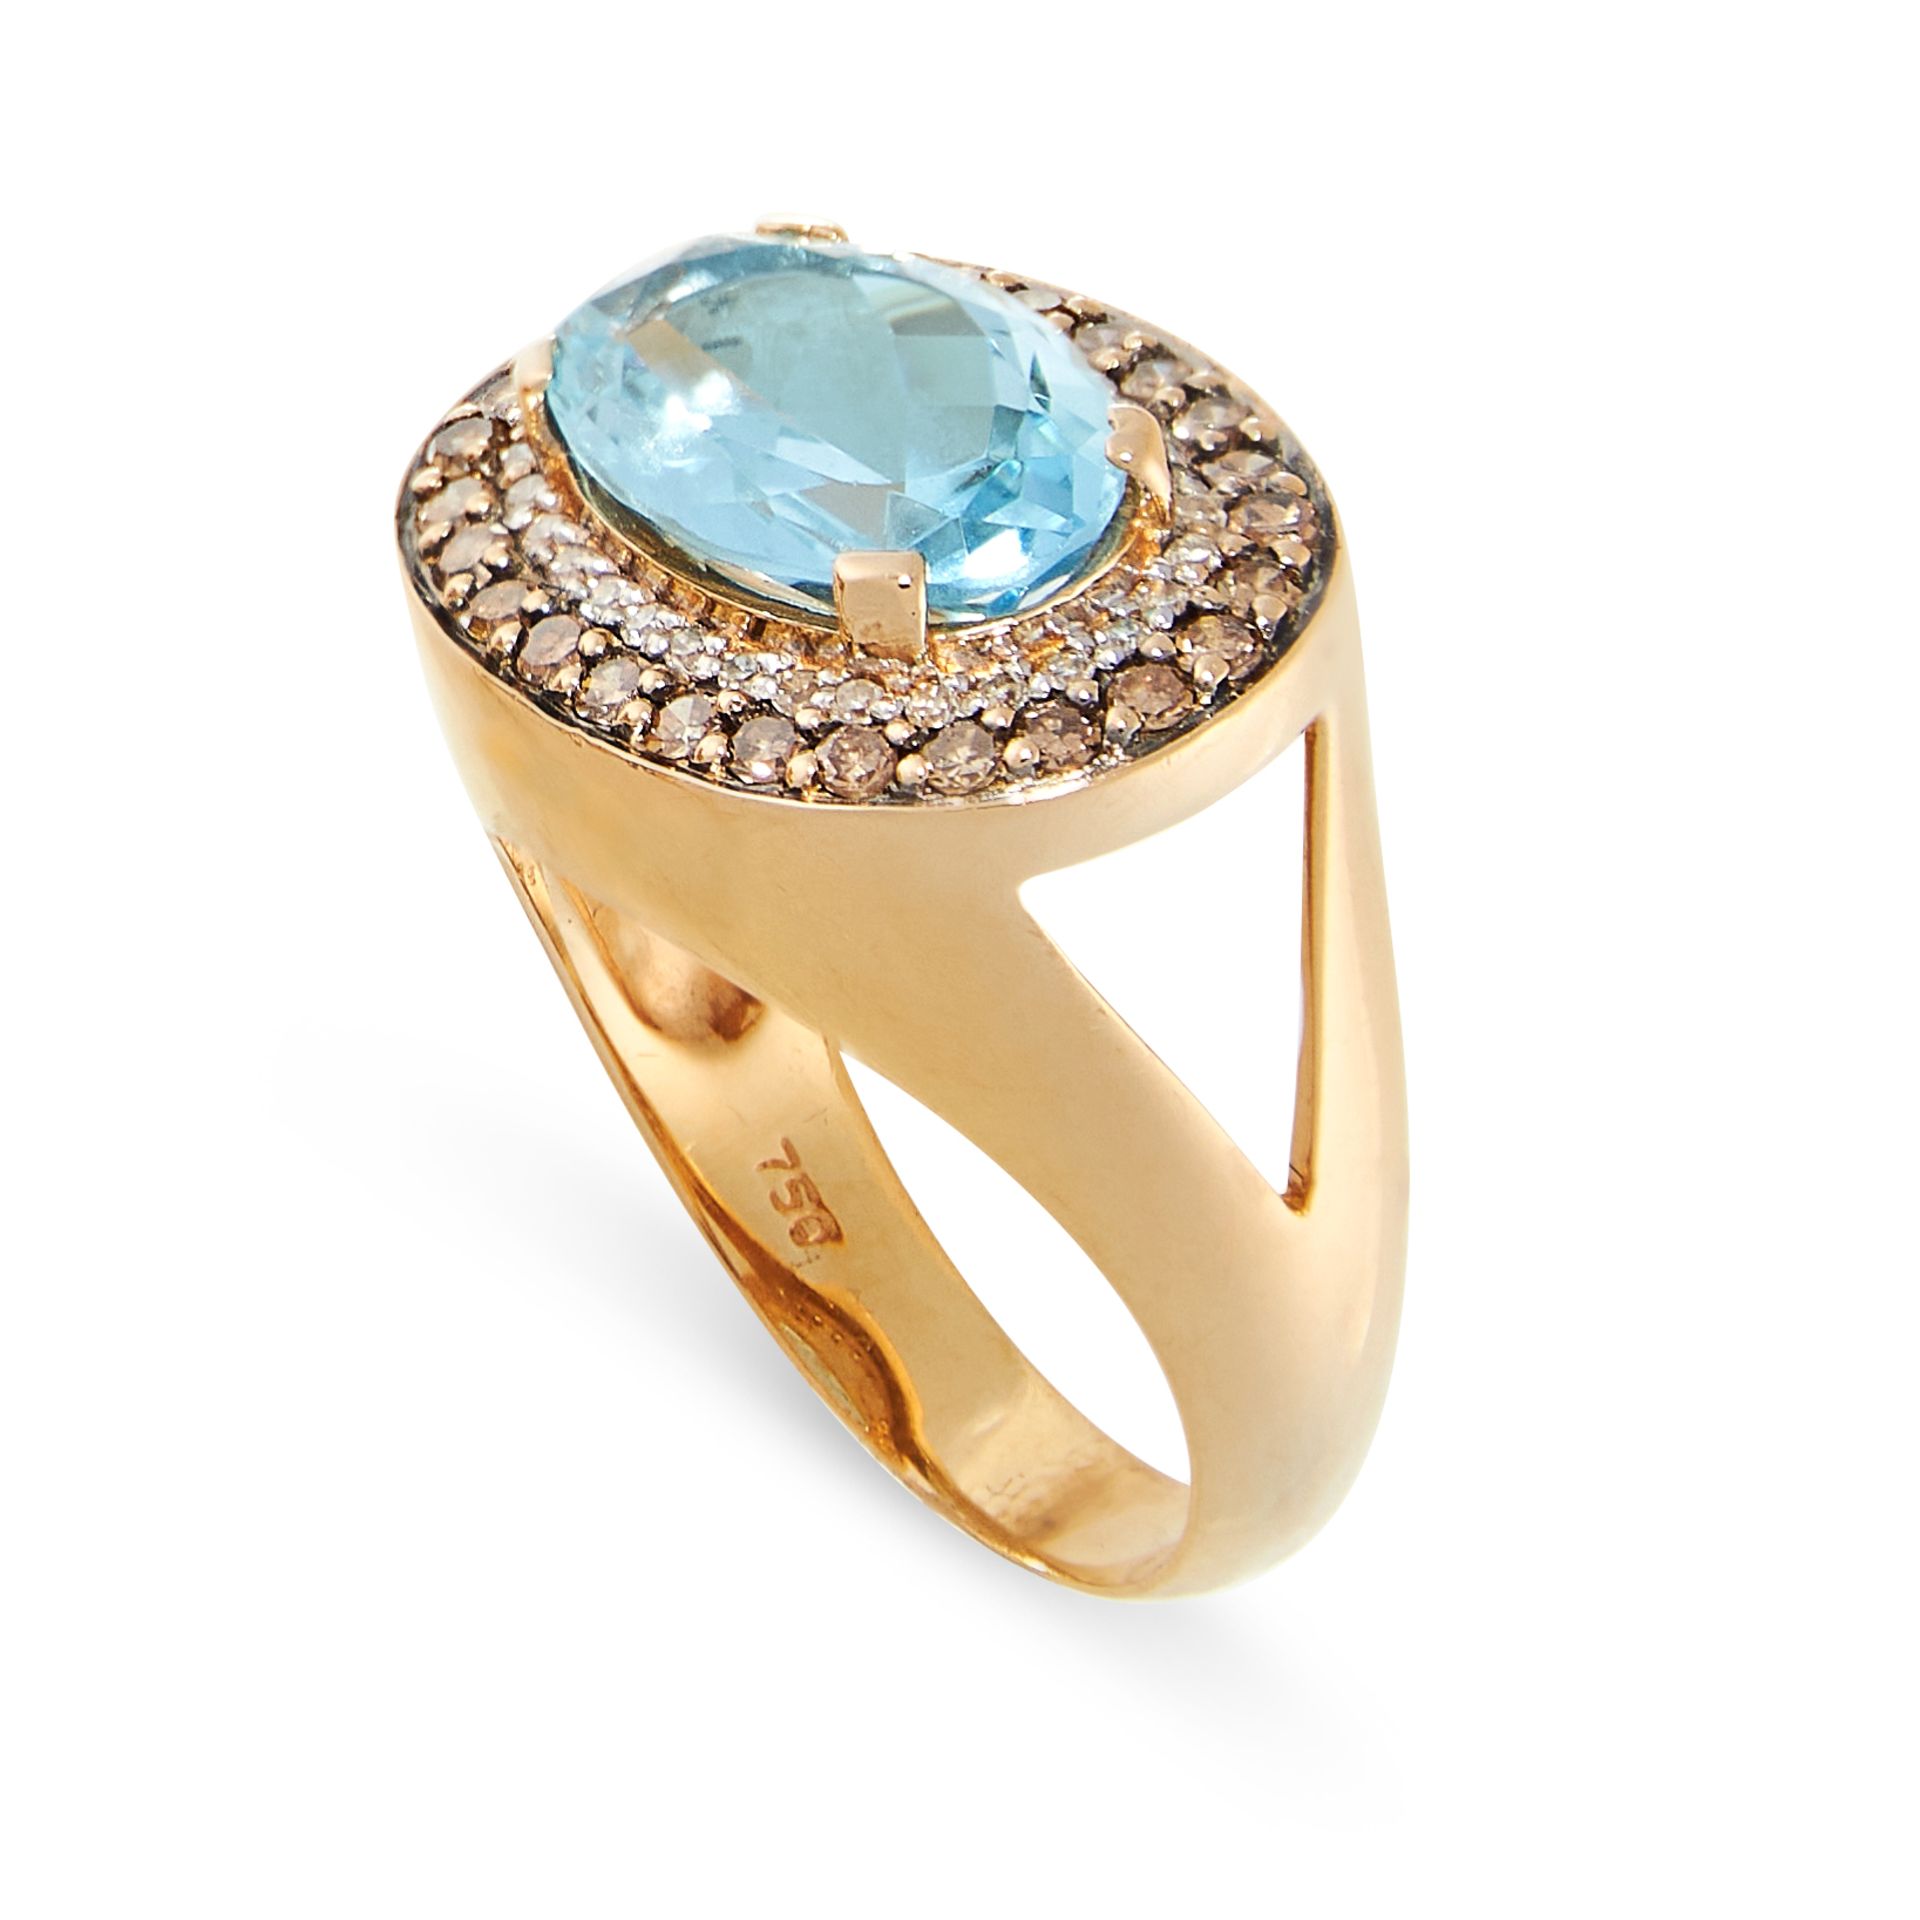 AN AQUAMARINE AND DIAMOND RING in 18ct yellow gold, set with an oval cut aquamarine of 1.95 carats - Image 2 of 2